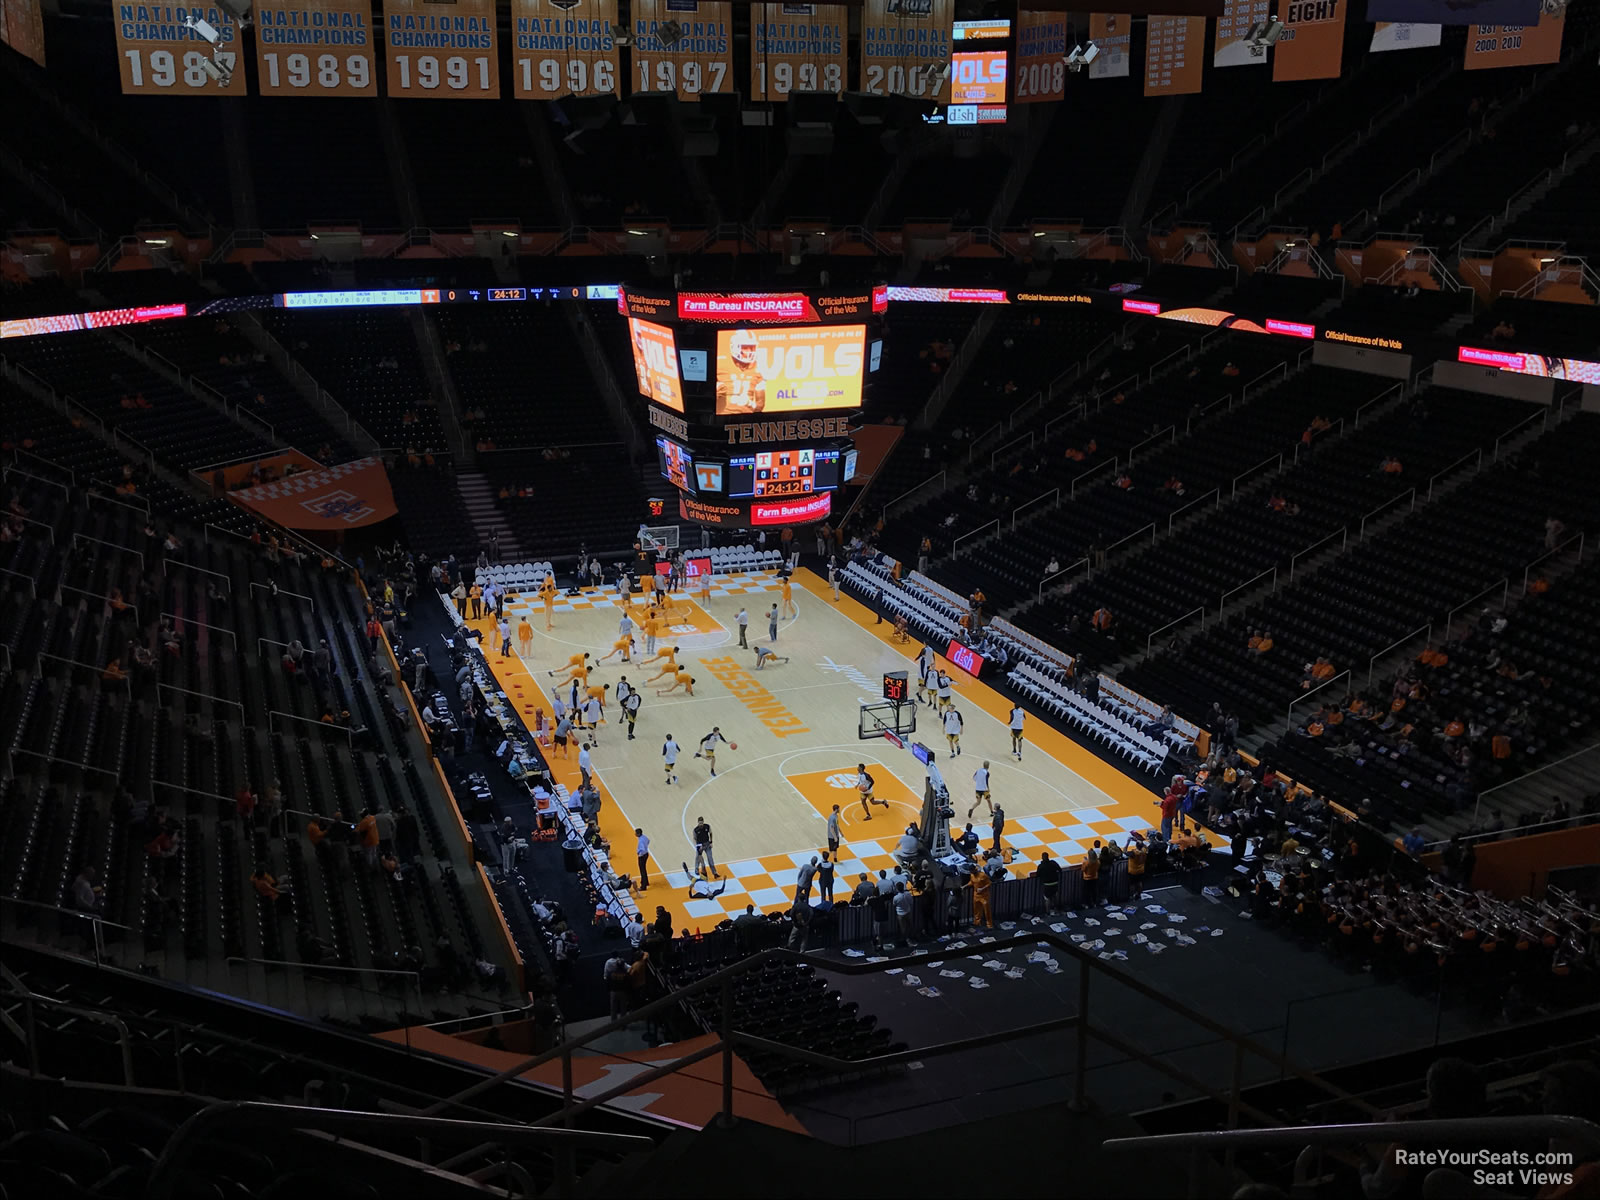 section 331a, row 7 seat view  - thompson-boling arena